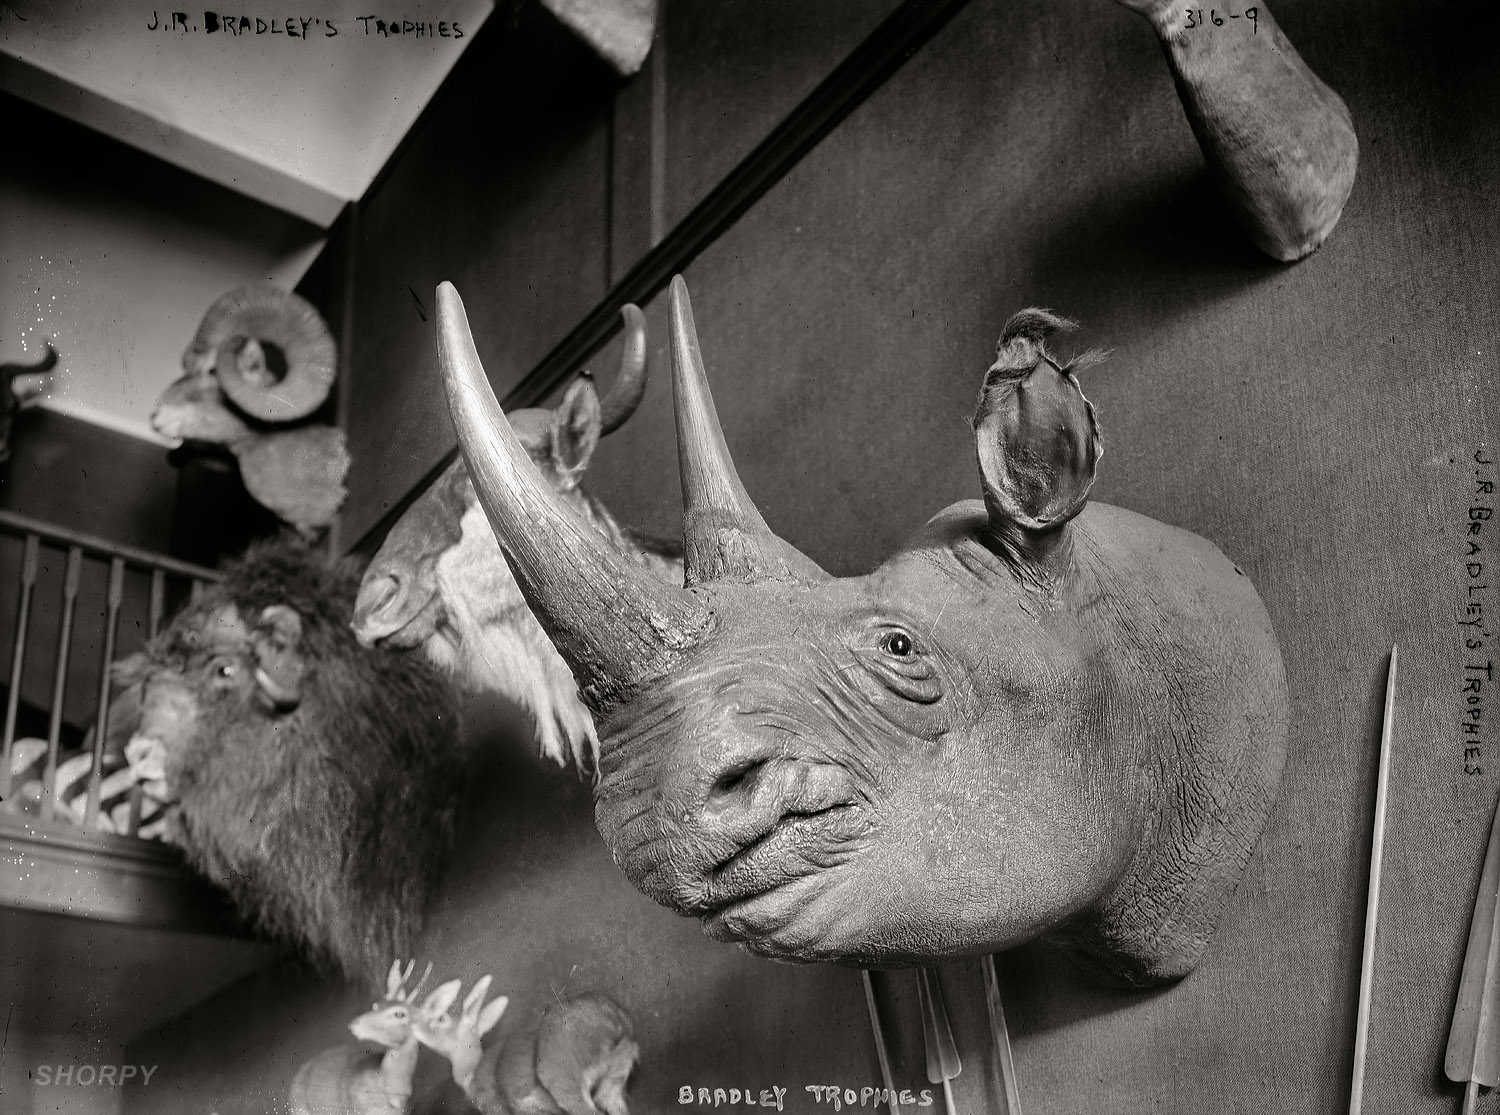 New York circa 1908. "J.R. Bradley's animal trophies." Another view of the 67th Street duplex belonging to millionaire casino owner, big-game hunter and polar explorer John Bradley. George Grantham Bain Collection. View full size.